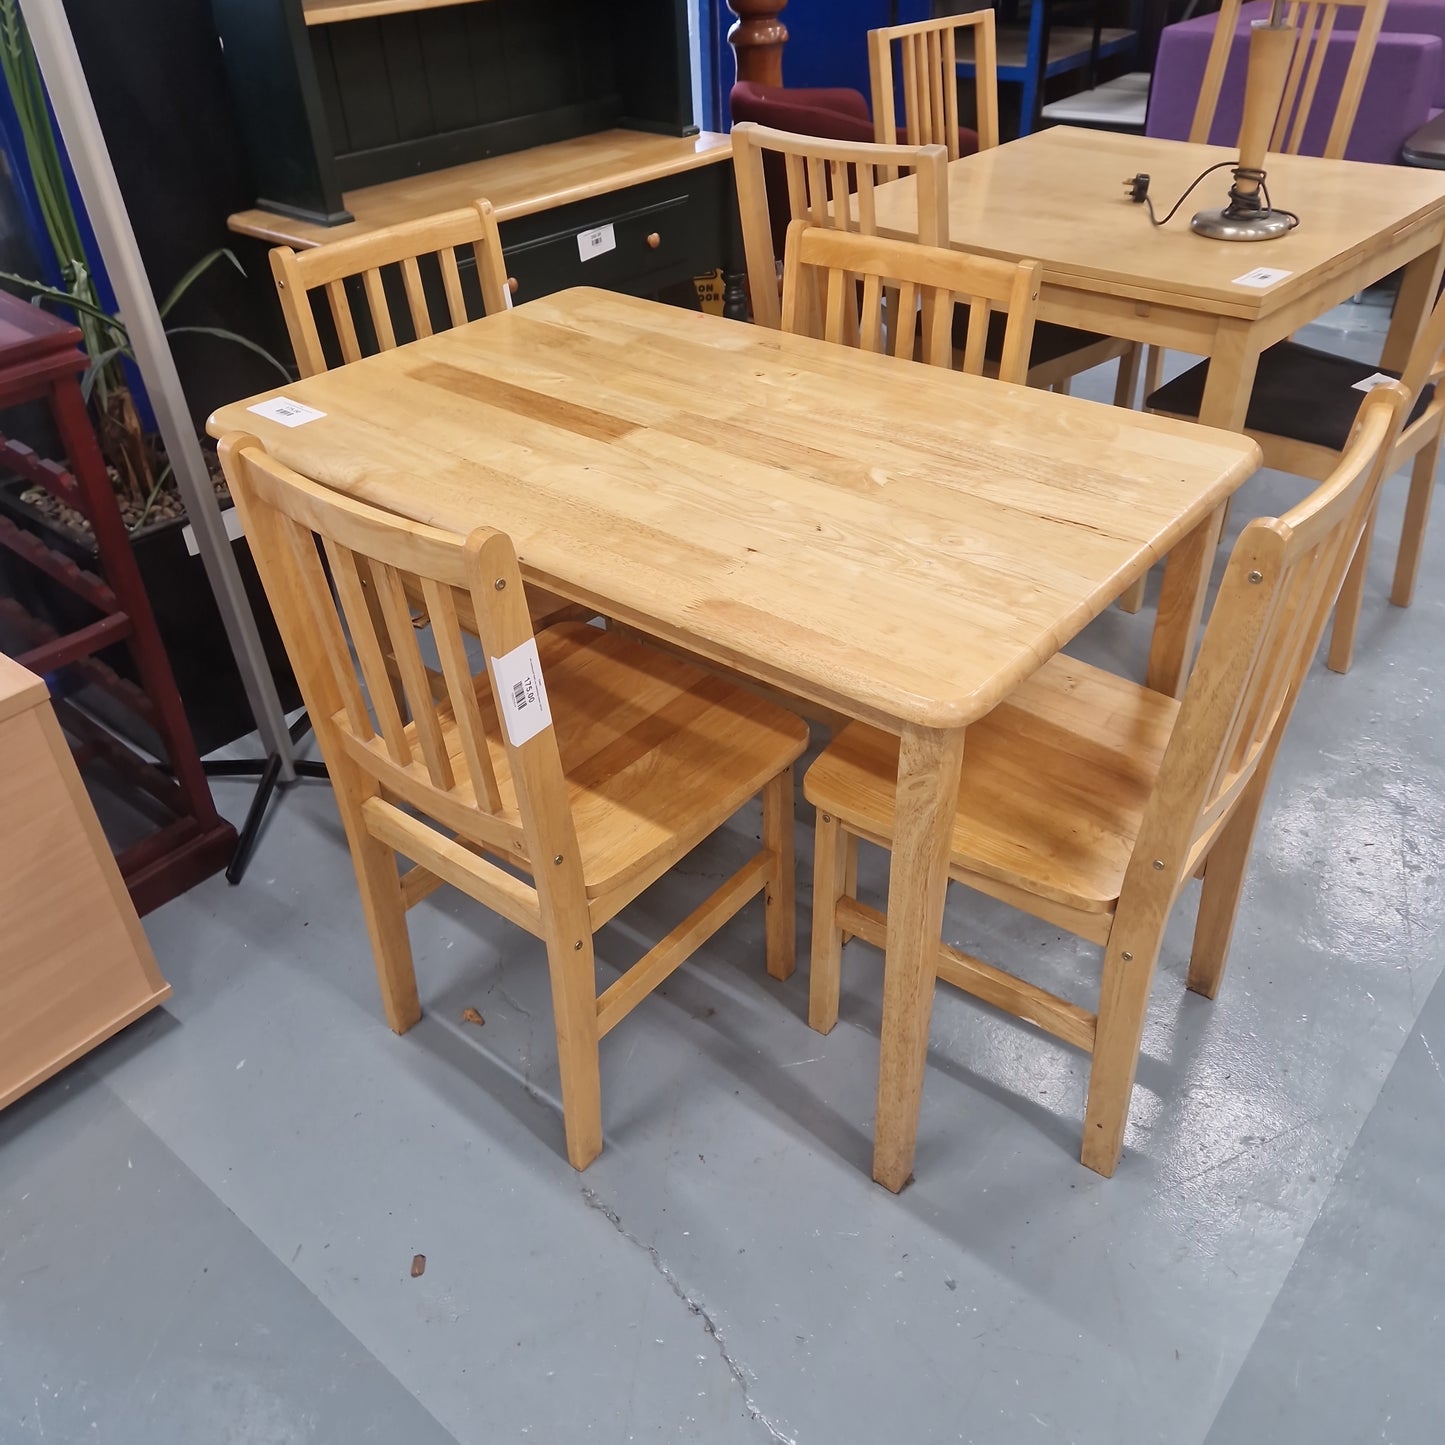 4ft hardwood table cw matching chairs